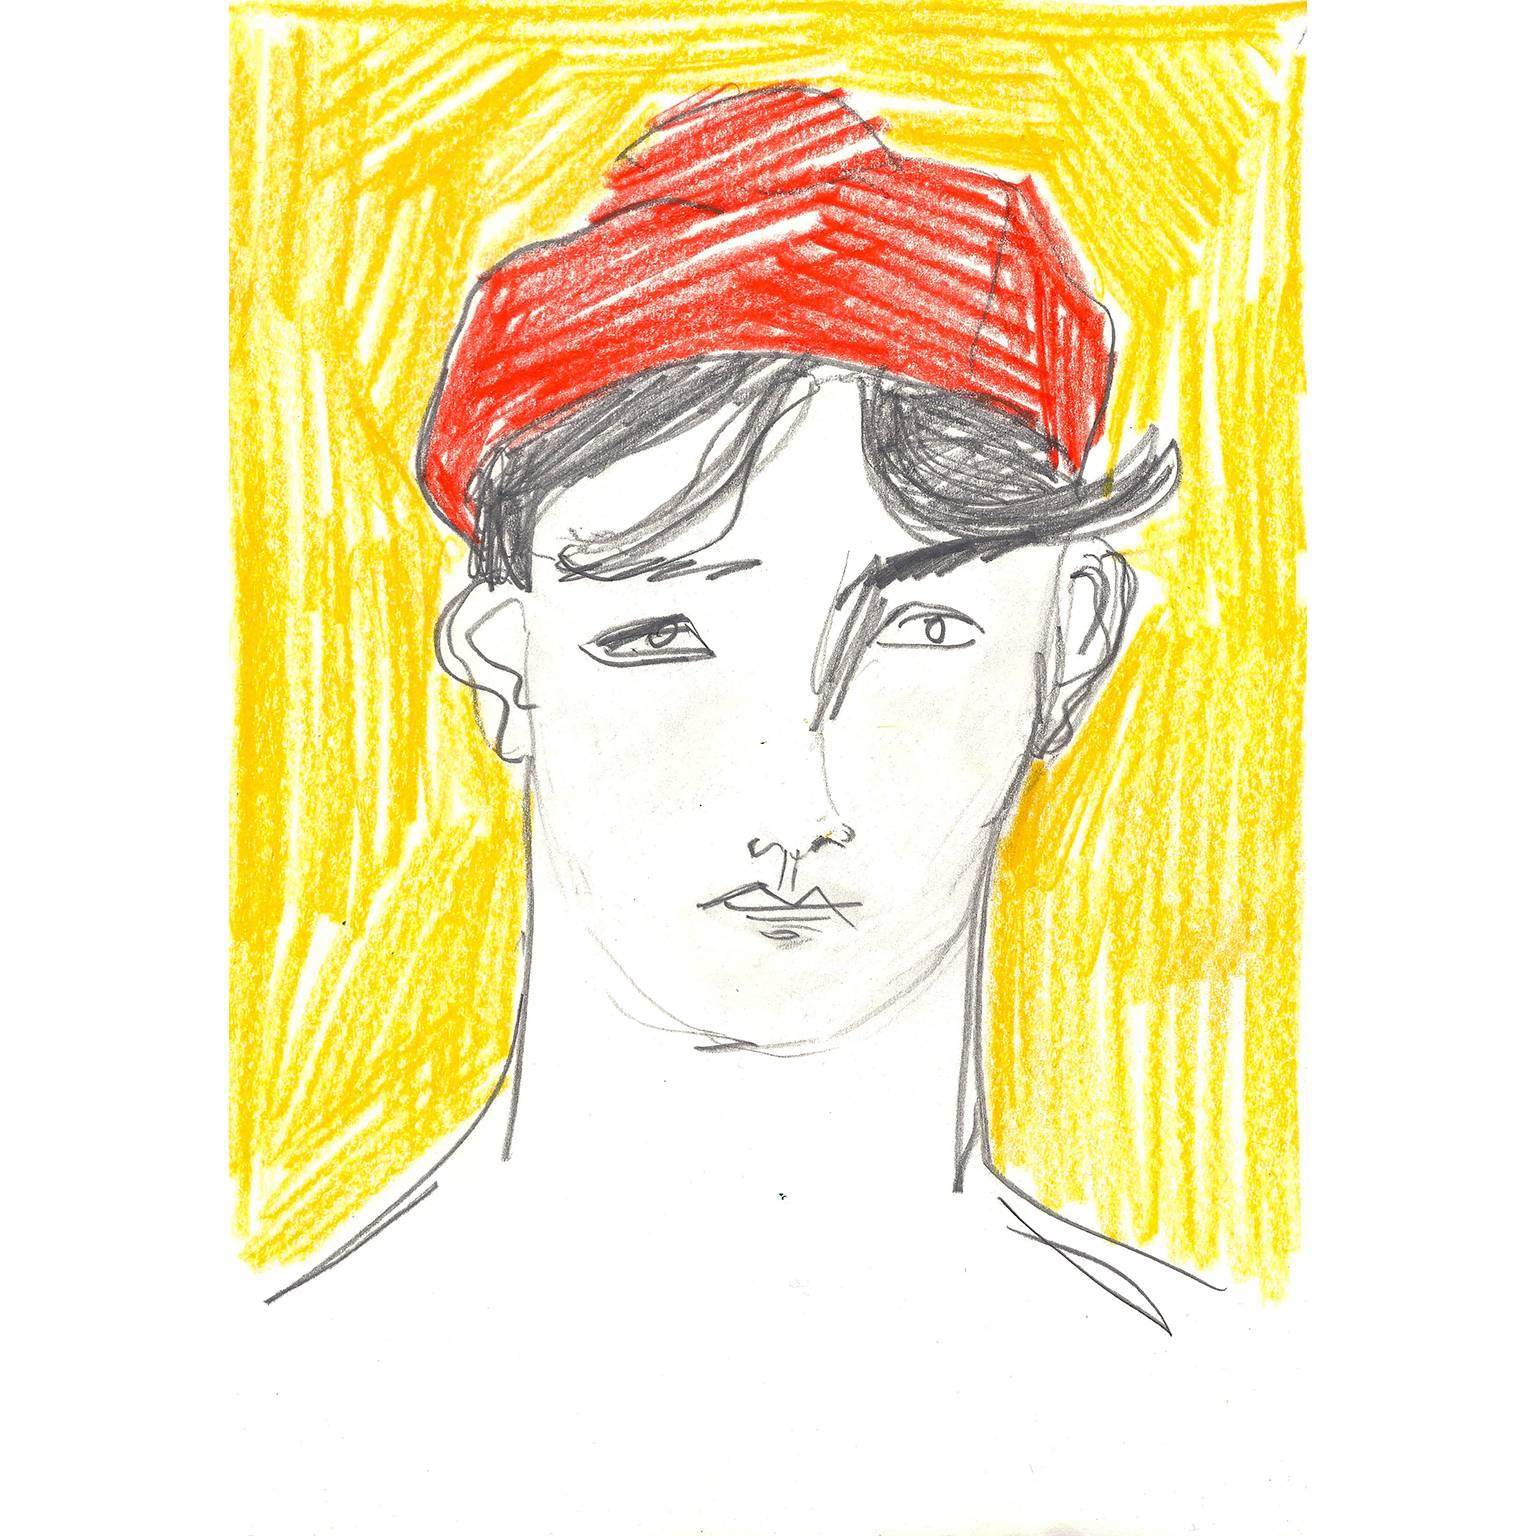 'Boy in a Red Hat' Painting Original Artwork